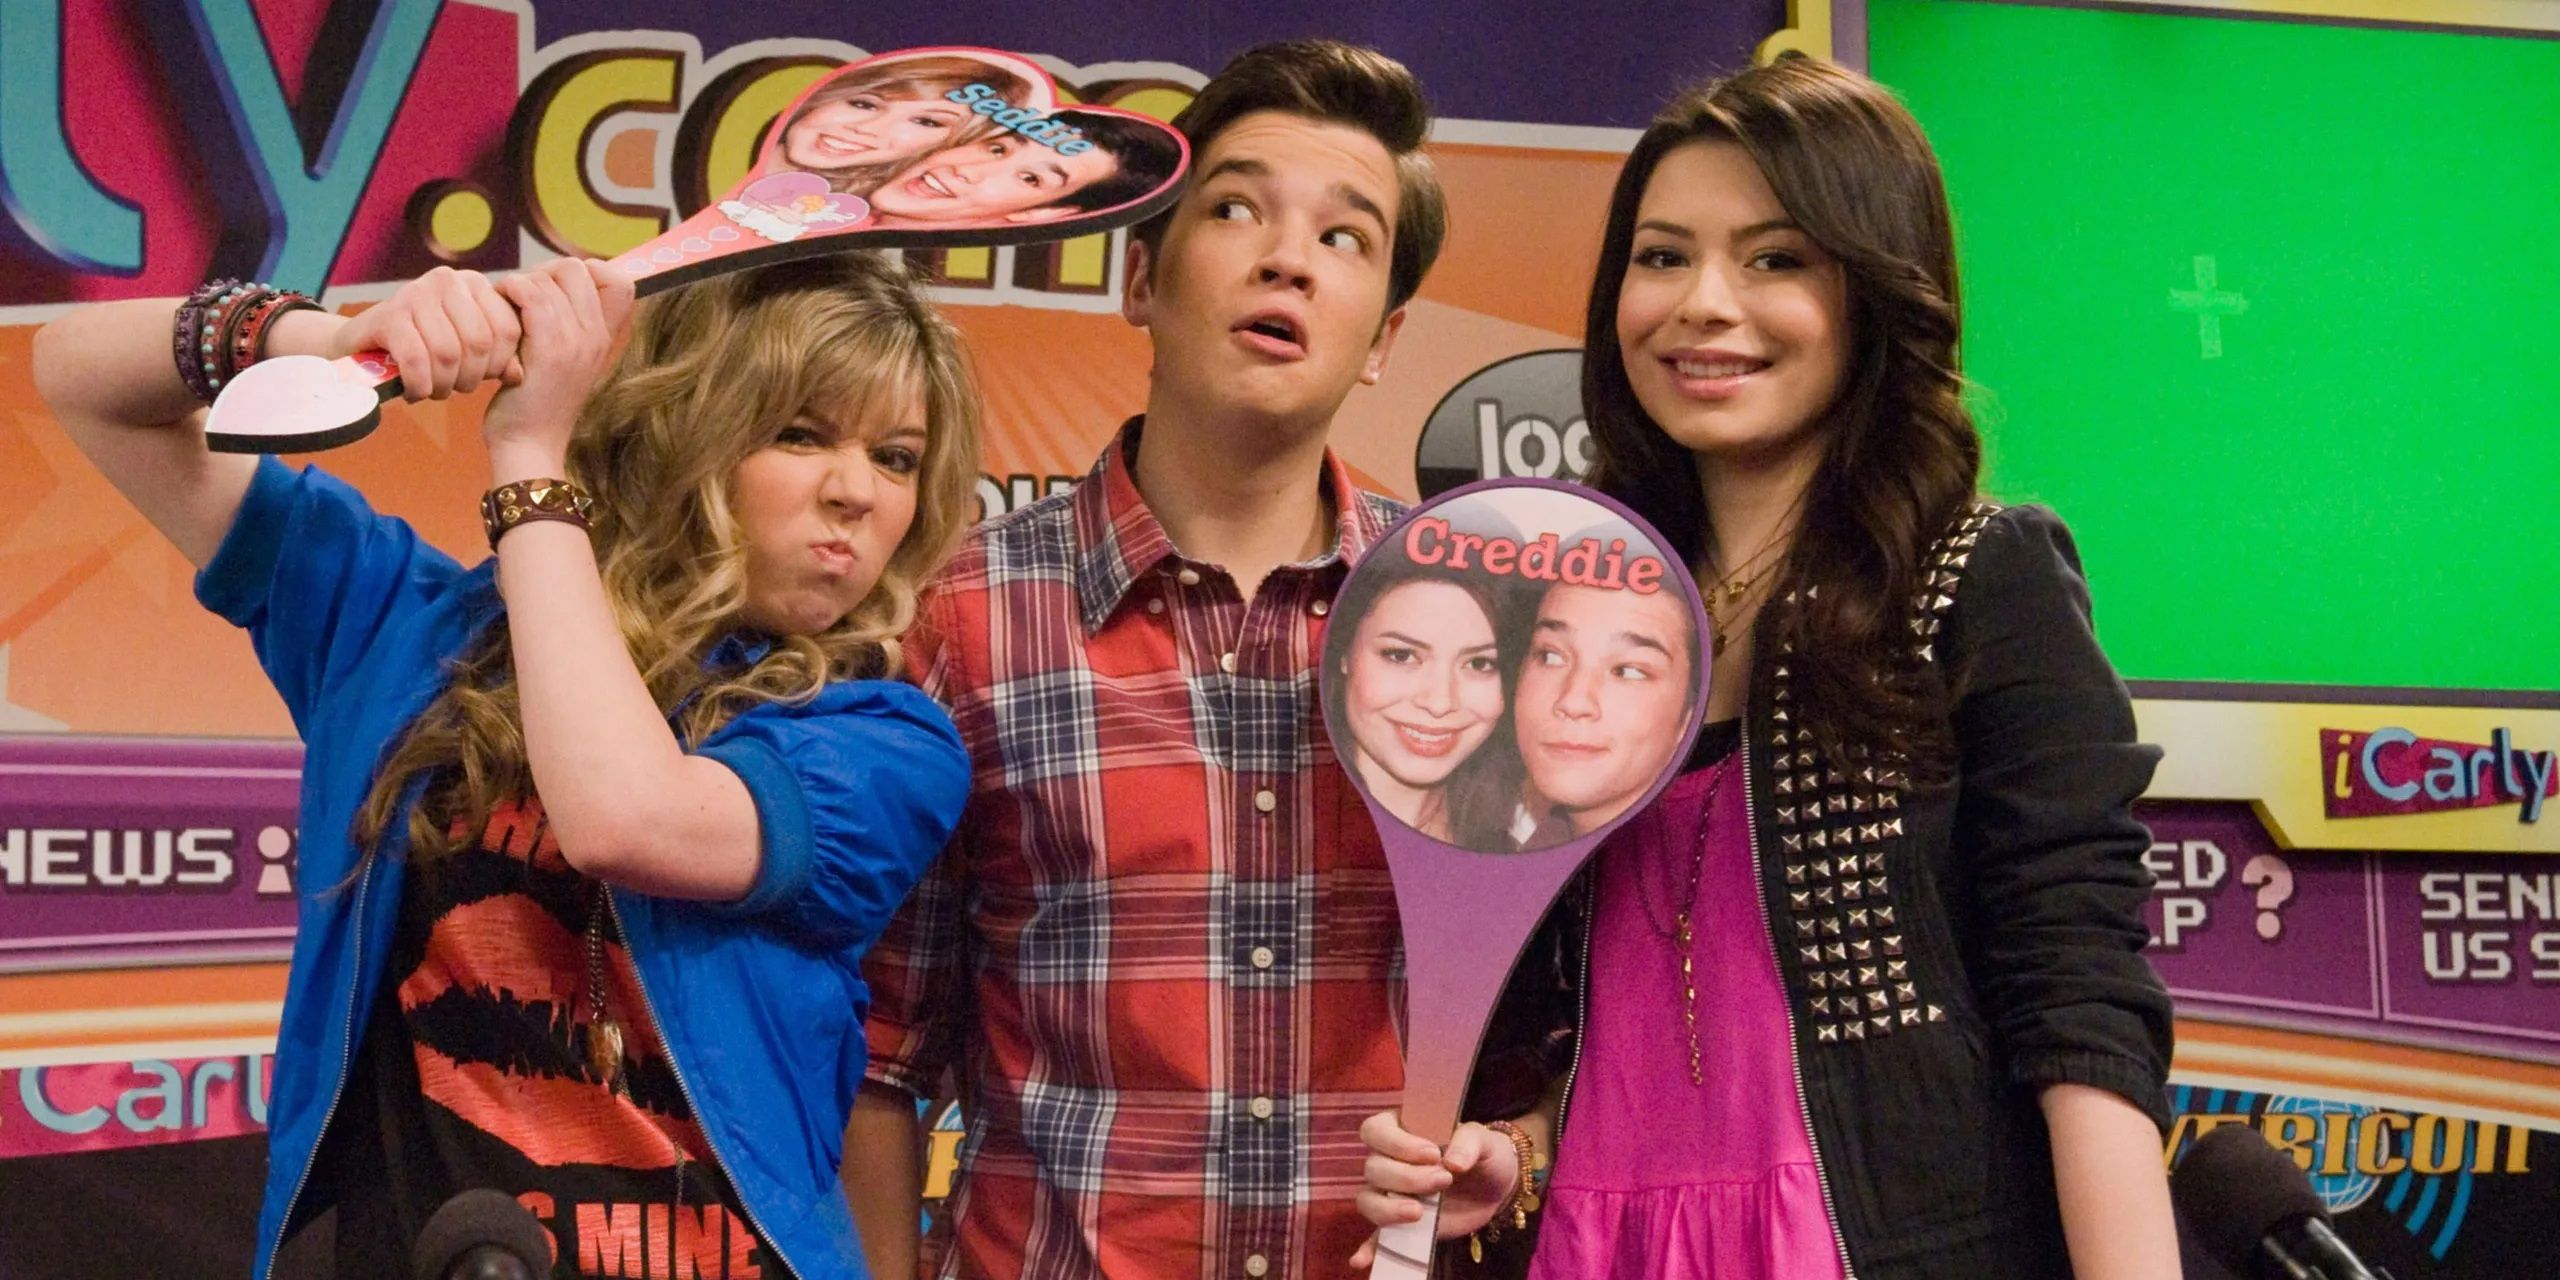 Carly, Sam, and Freddi from iCarly.